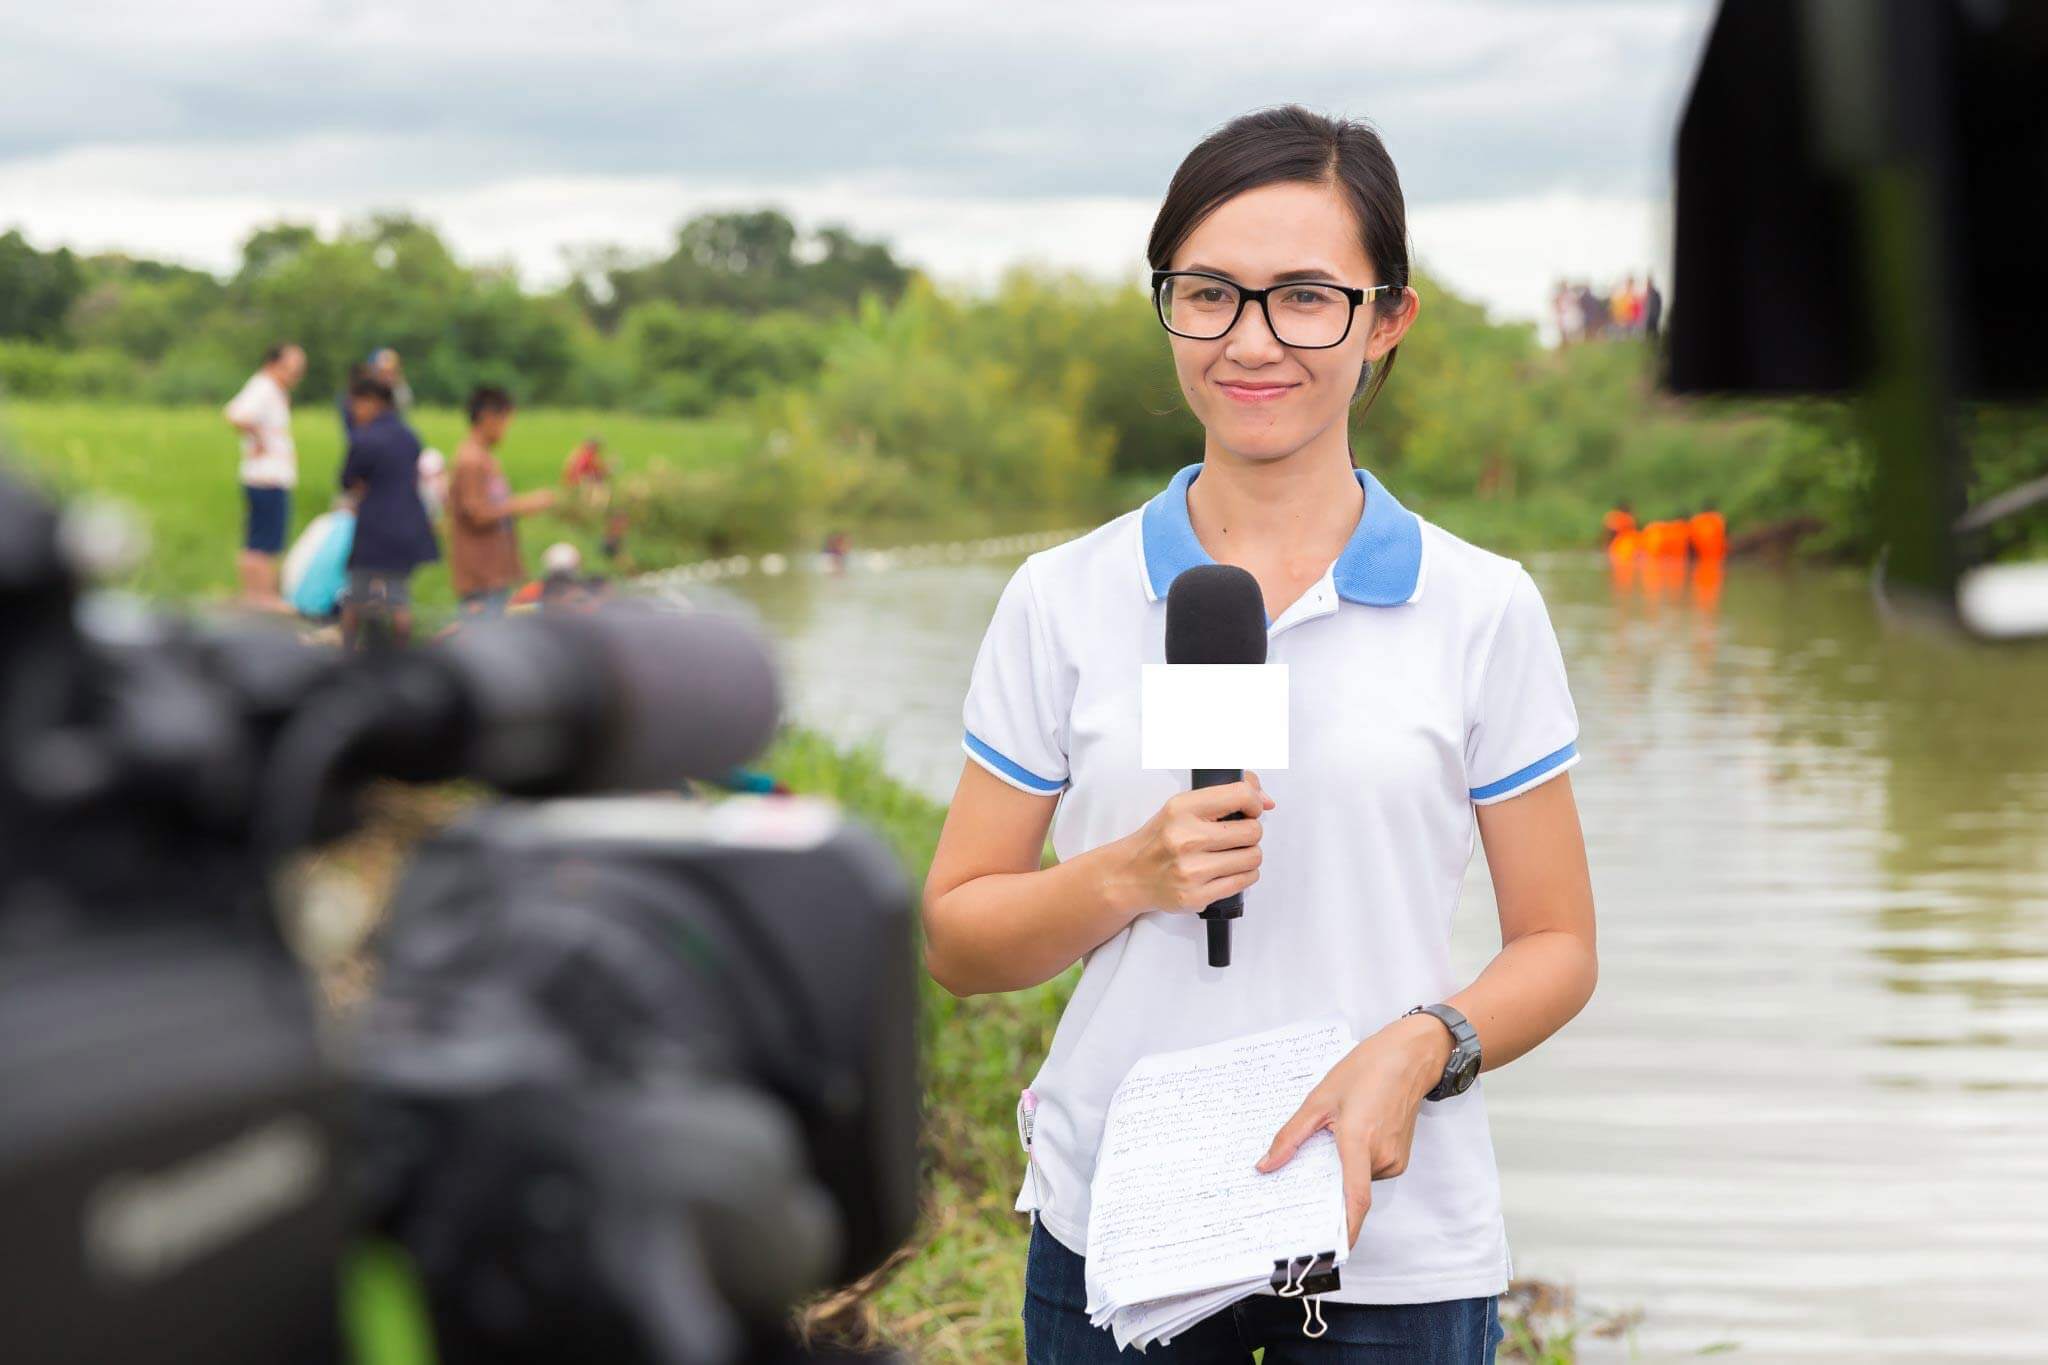 7 Must Have Skills for a Multimedia Journalist